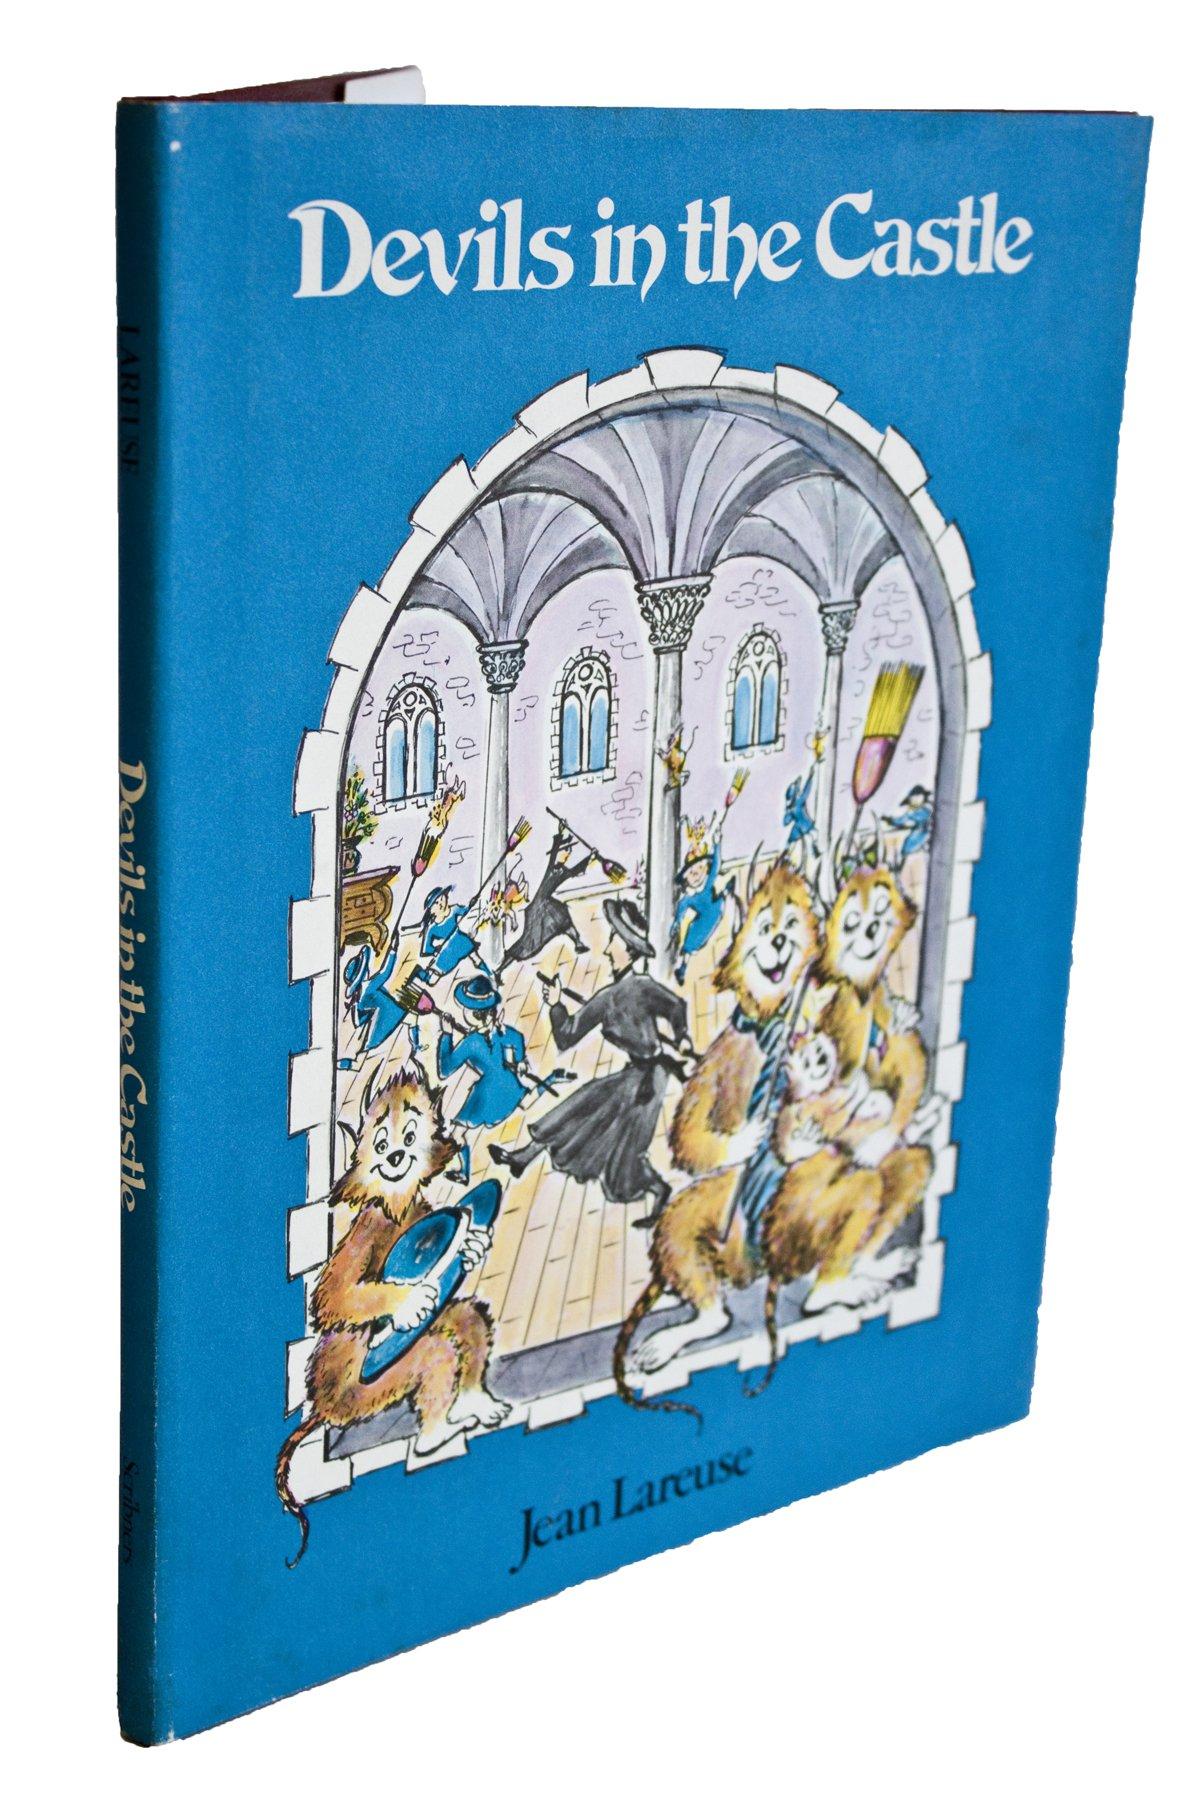 1979 'Jean Lareuse: Devils in the Castle' Blue Book - Print by Unknown